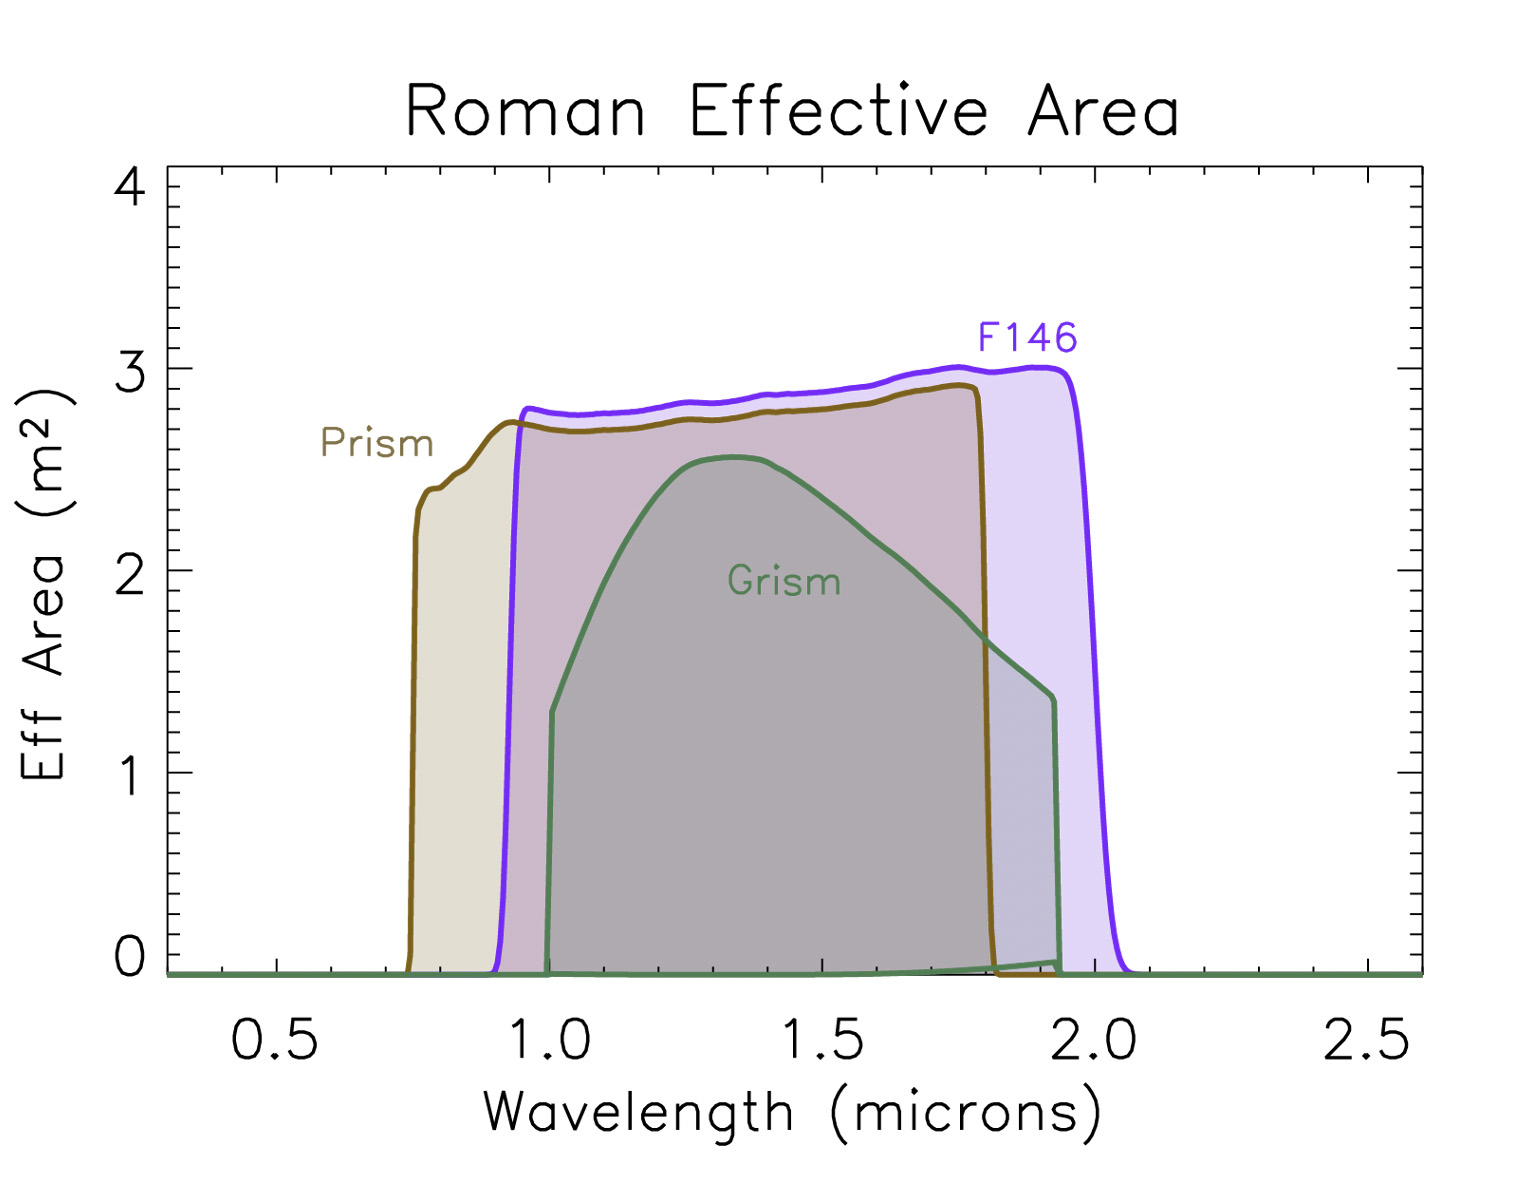 Grism and Prism effective area vs. wavelength